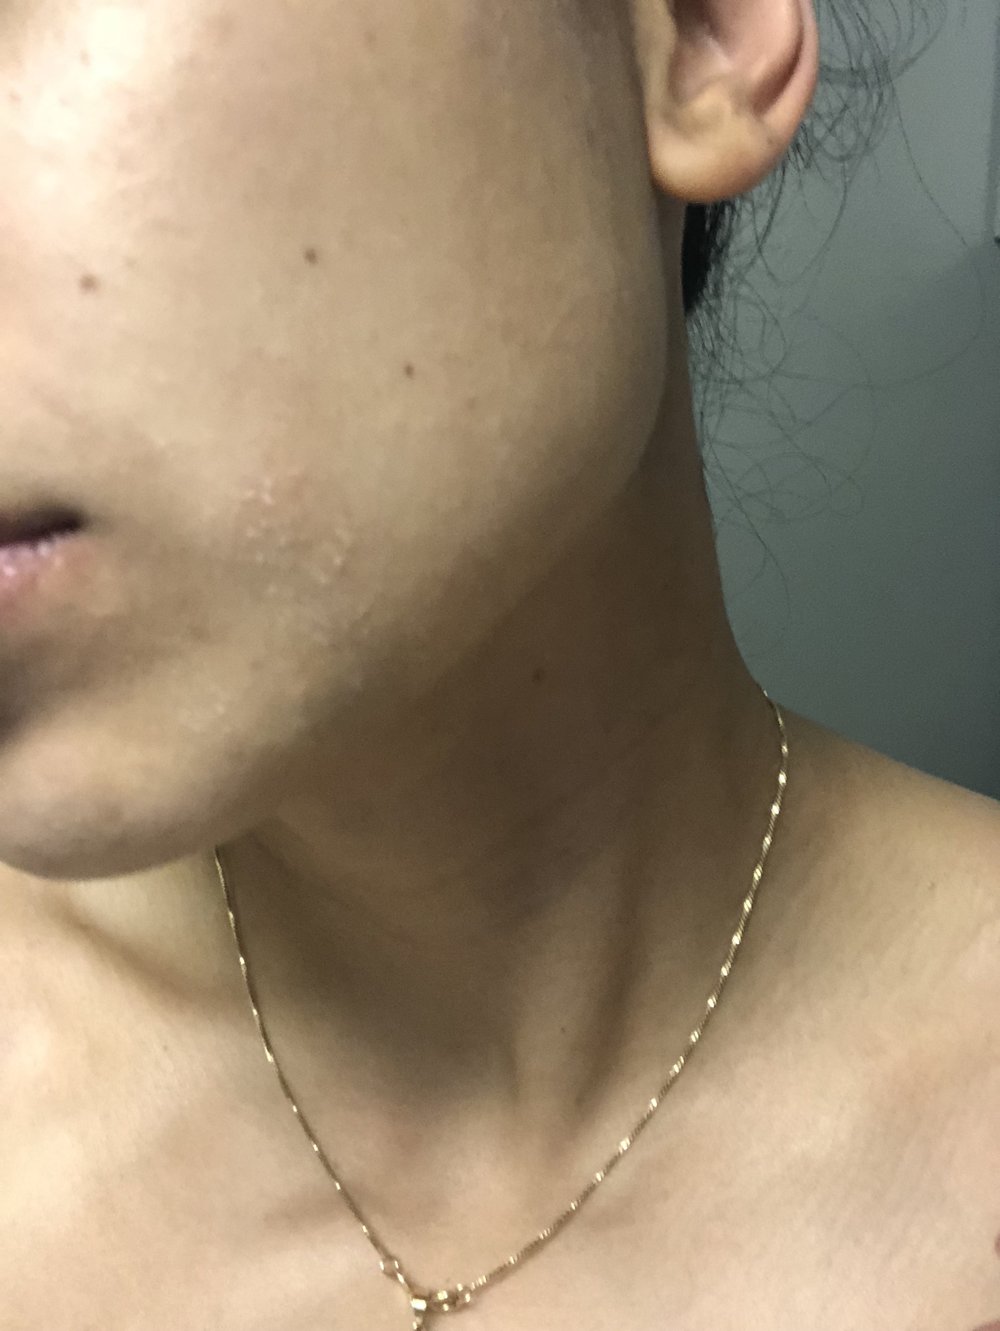 Eczema on the face